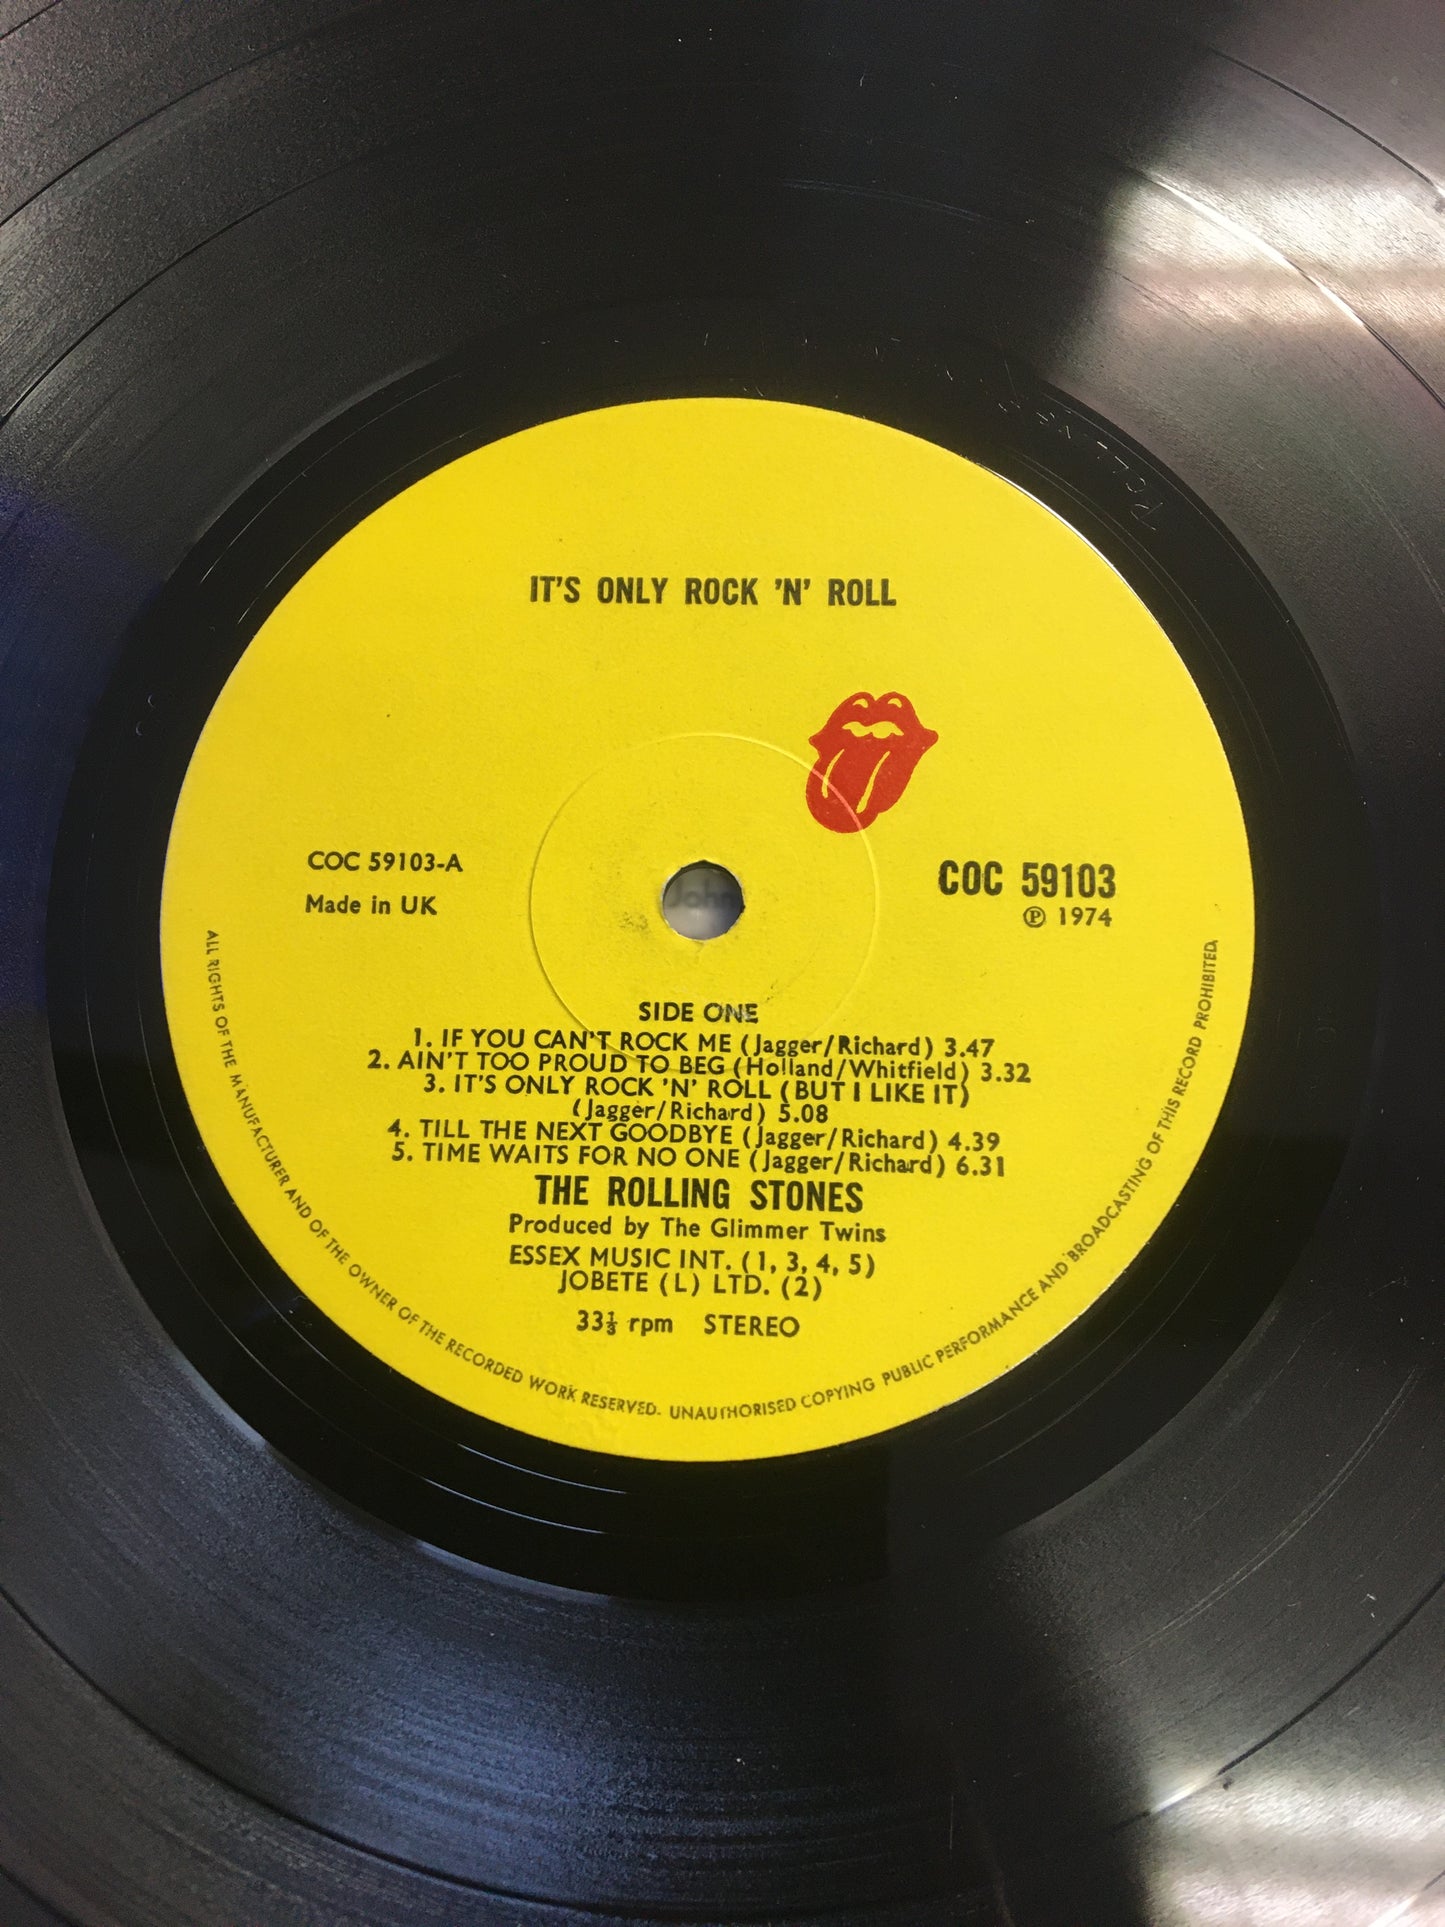 The Rolling Stones lp ‘ It’s Only Rock N Roll